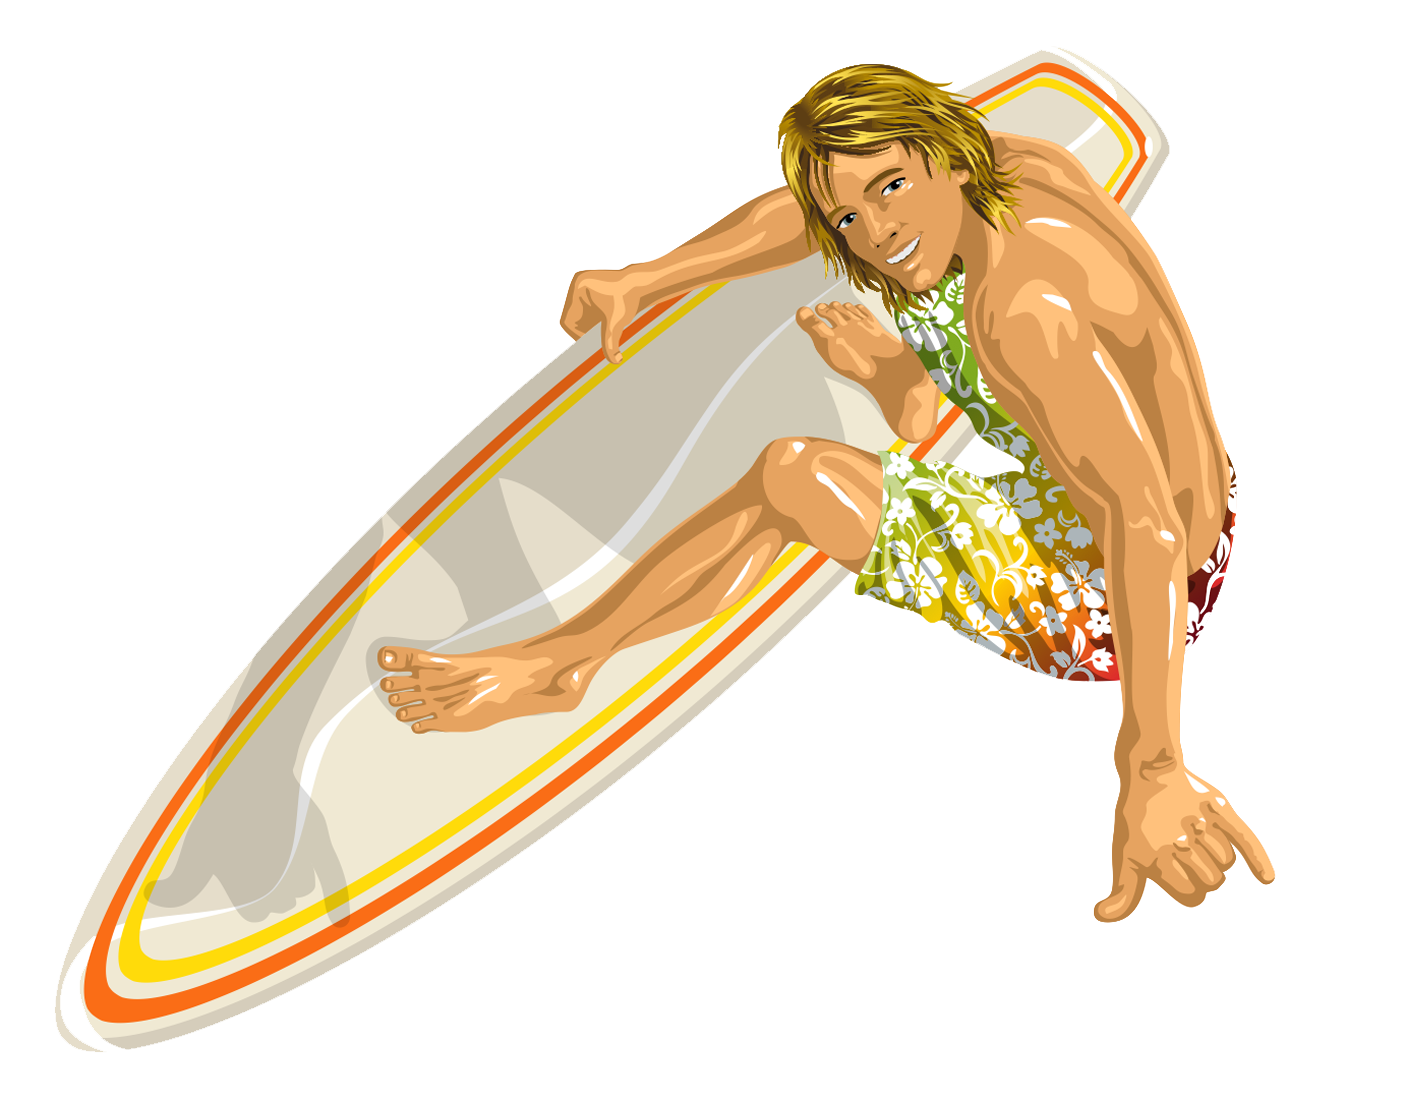 Download PNG image - Surfing 